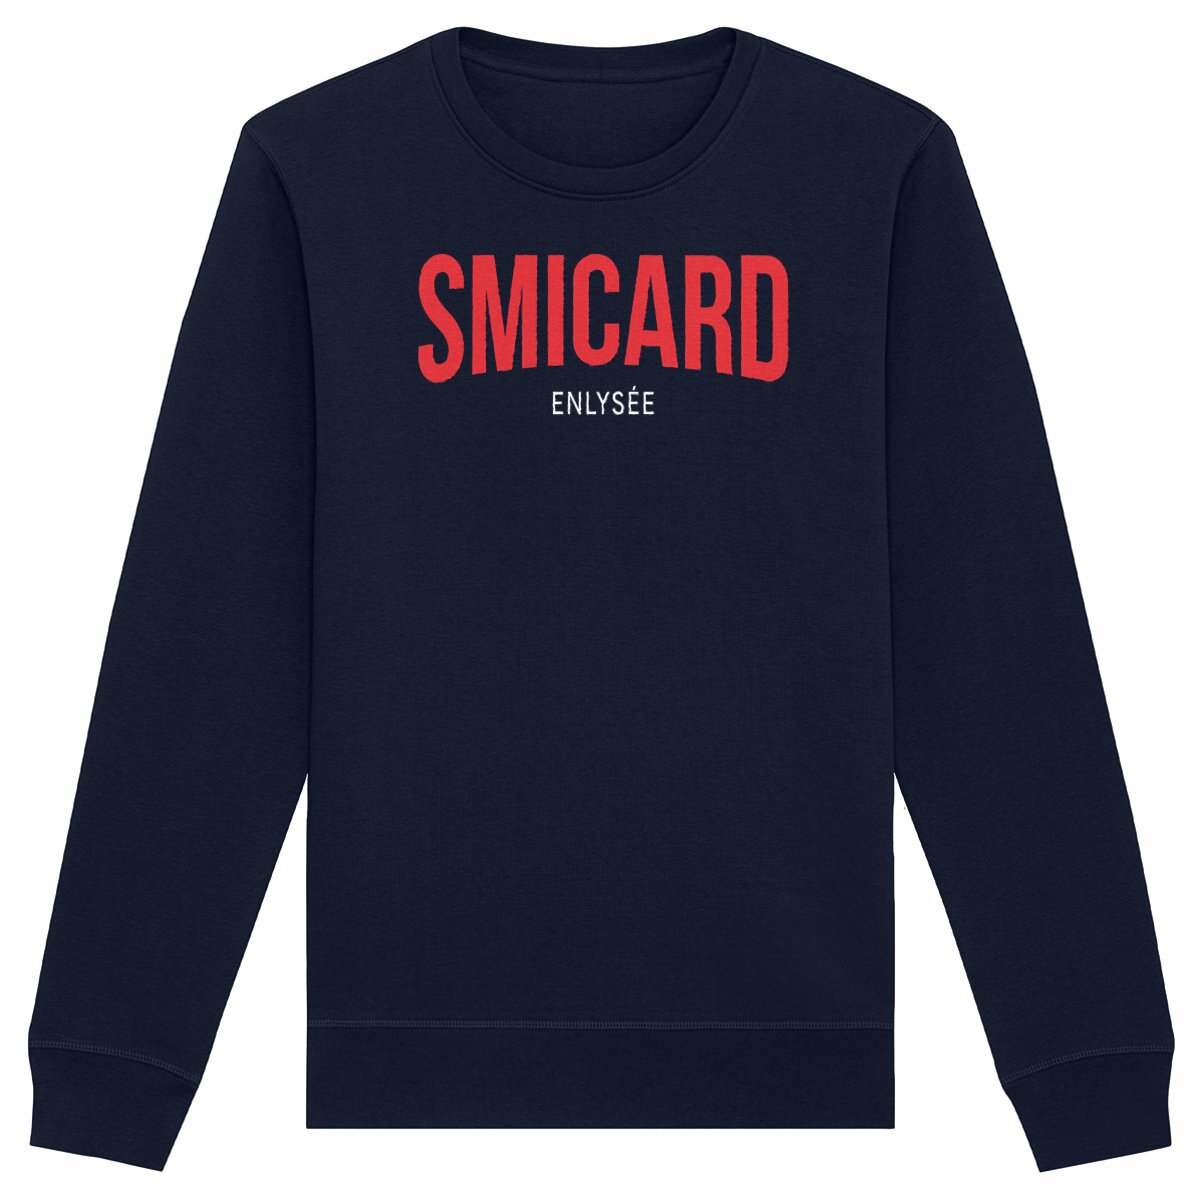 Le Sweat Shirt Smicard and chill